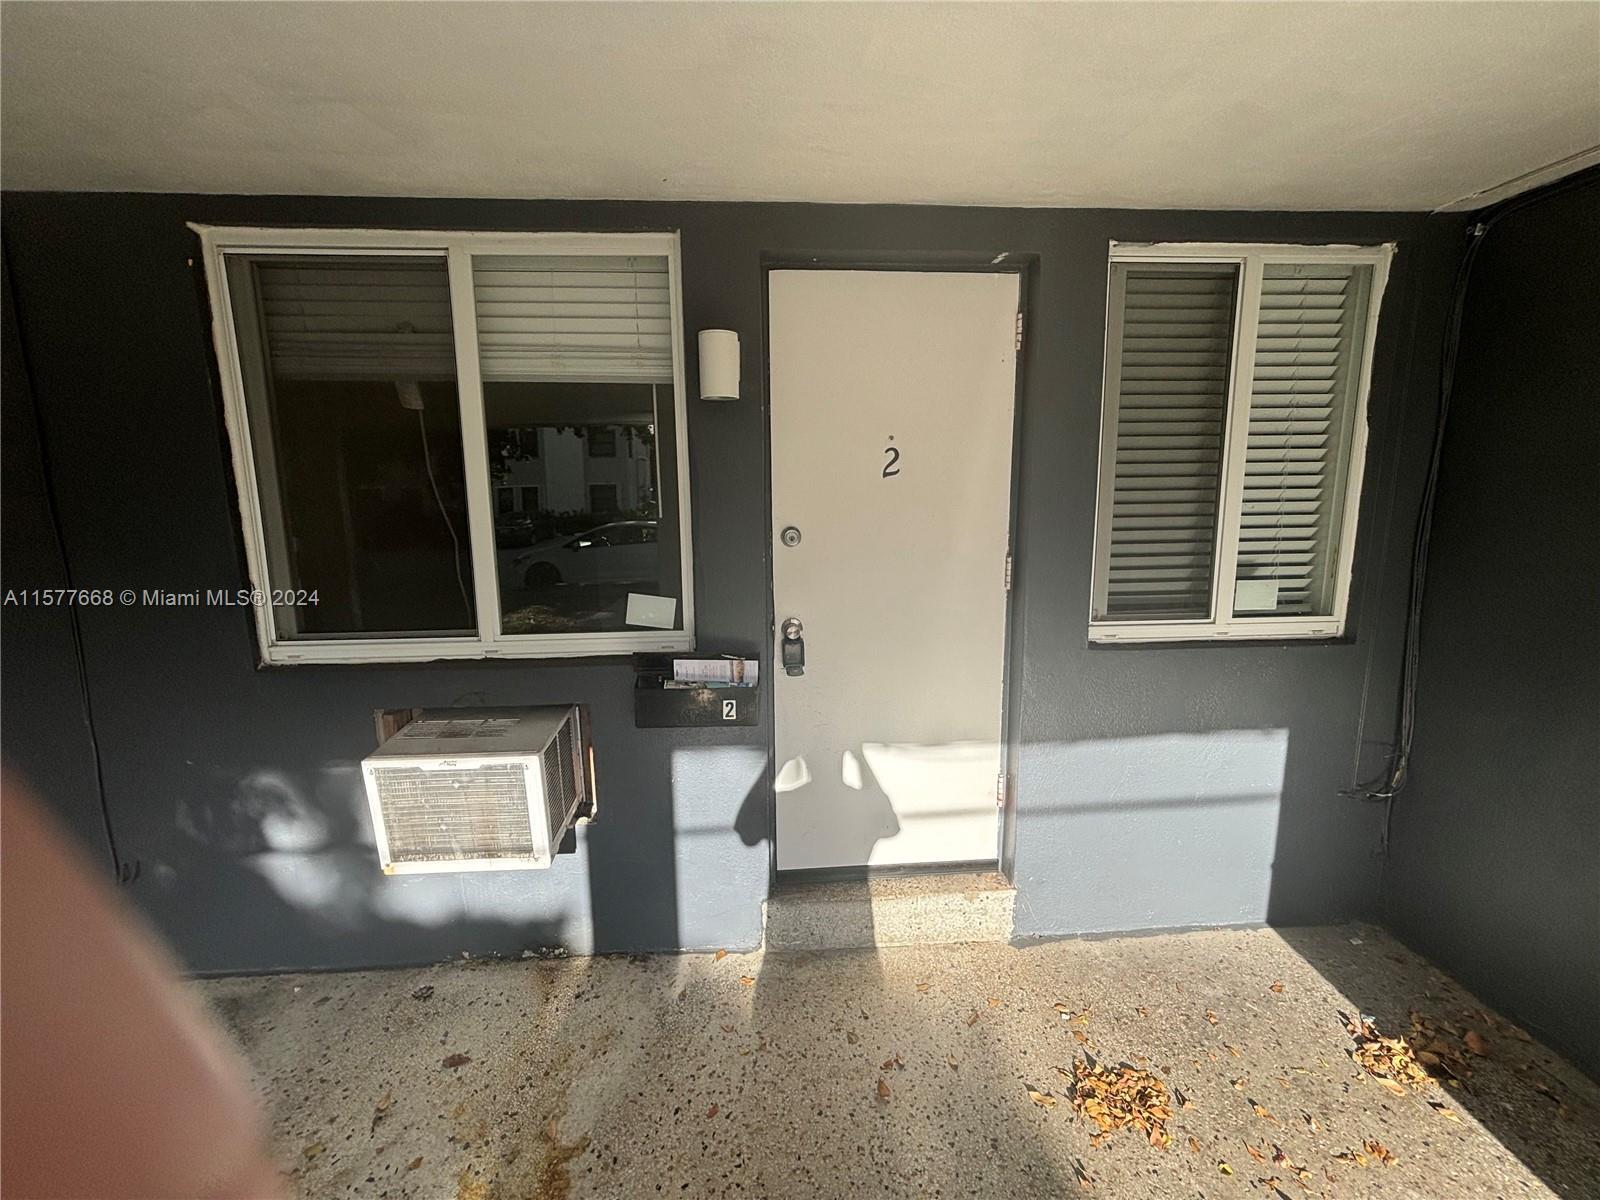 Photo of 610 NE 12th Ave #2 in Fort Lauderdale, FL